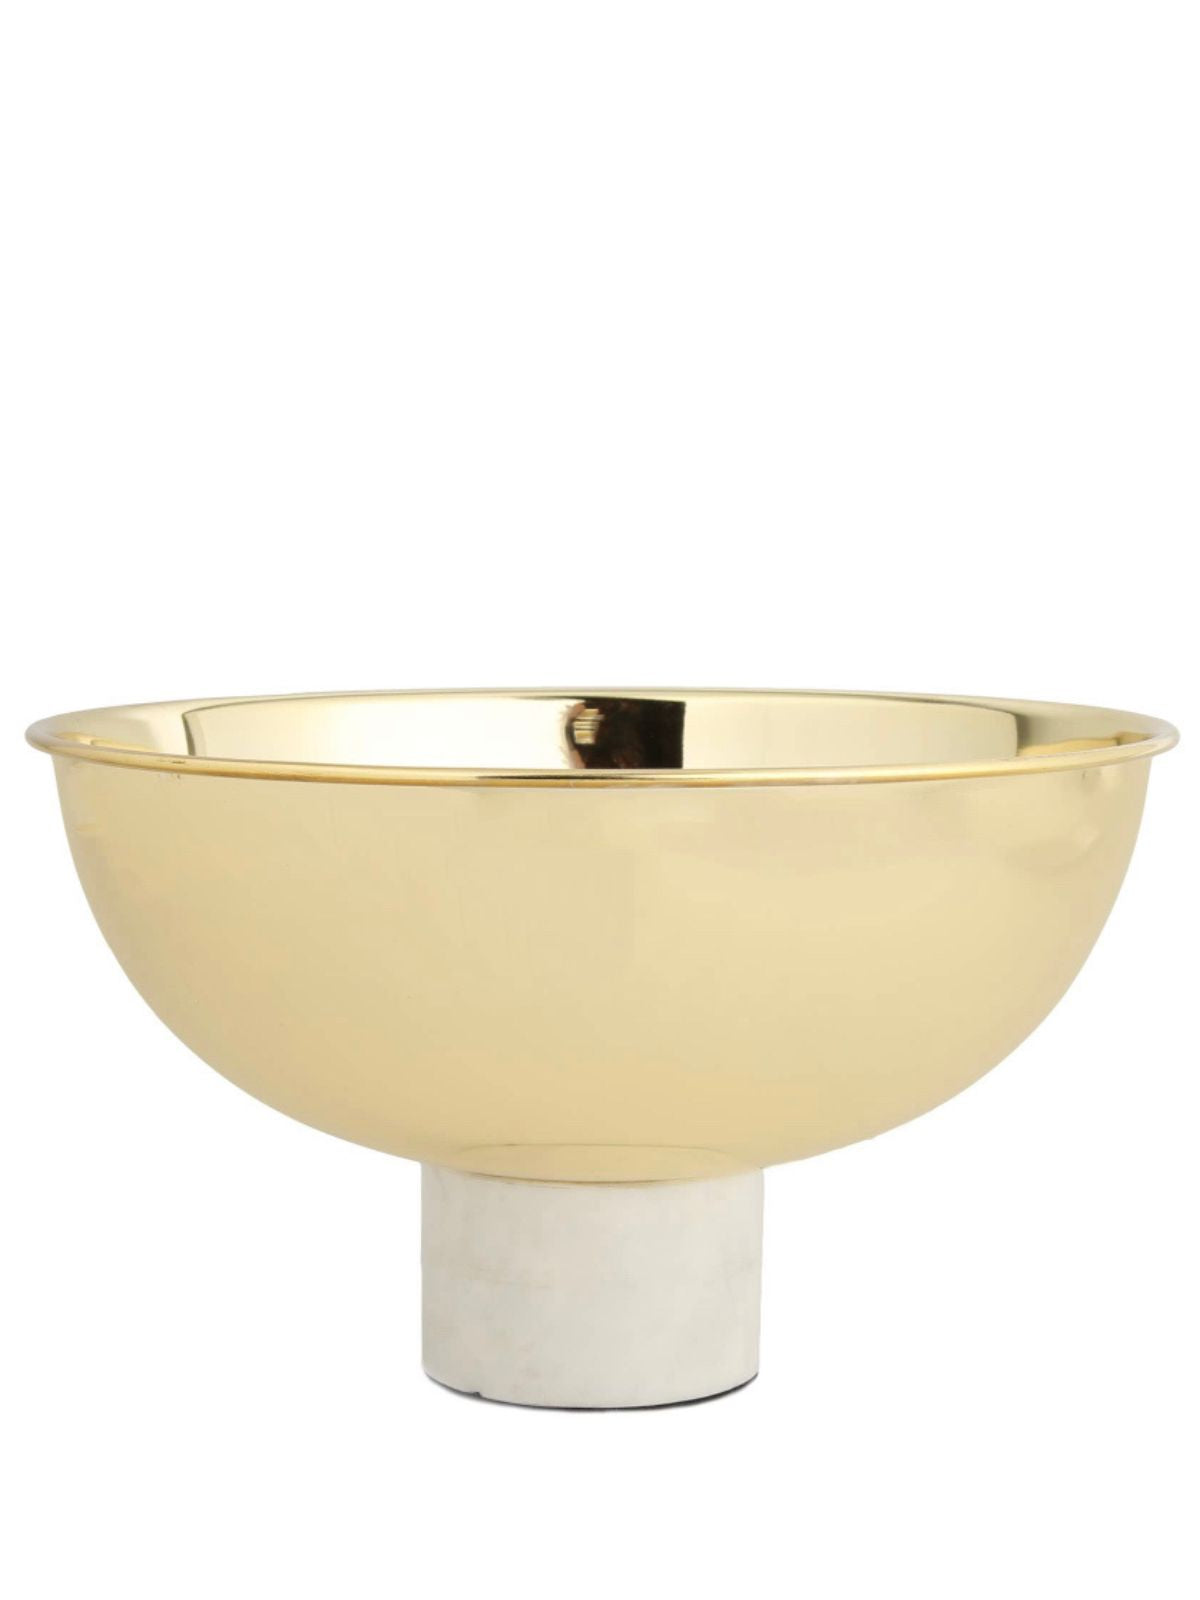 Stainless Gold Footed Bowl On White Stone Base, 10D x 6.75H. 